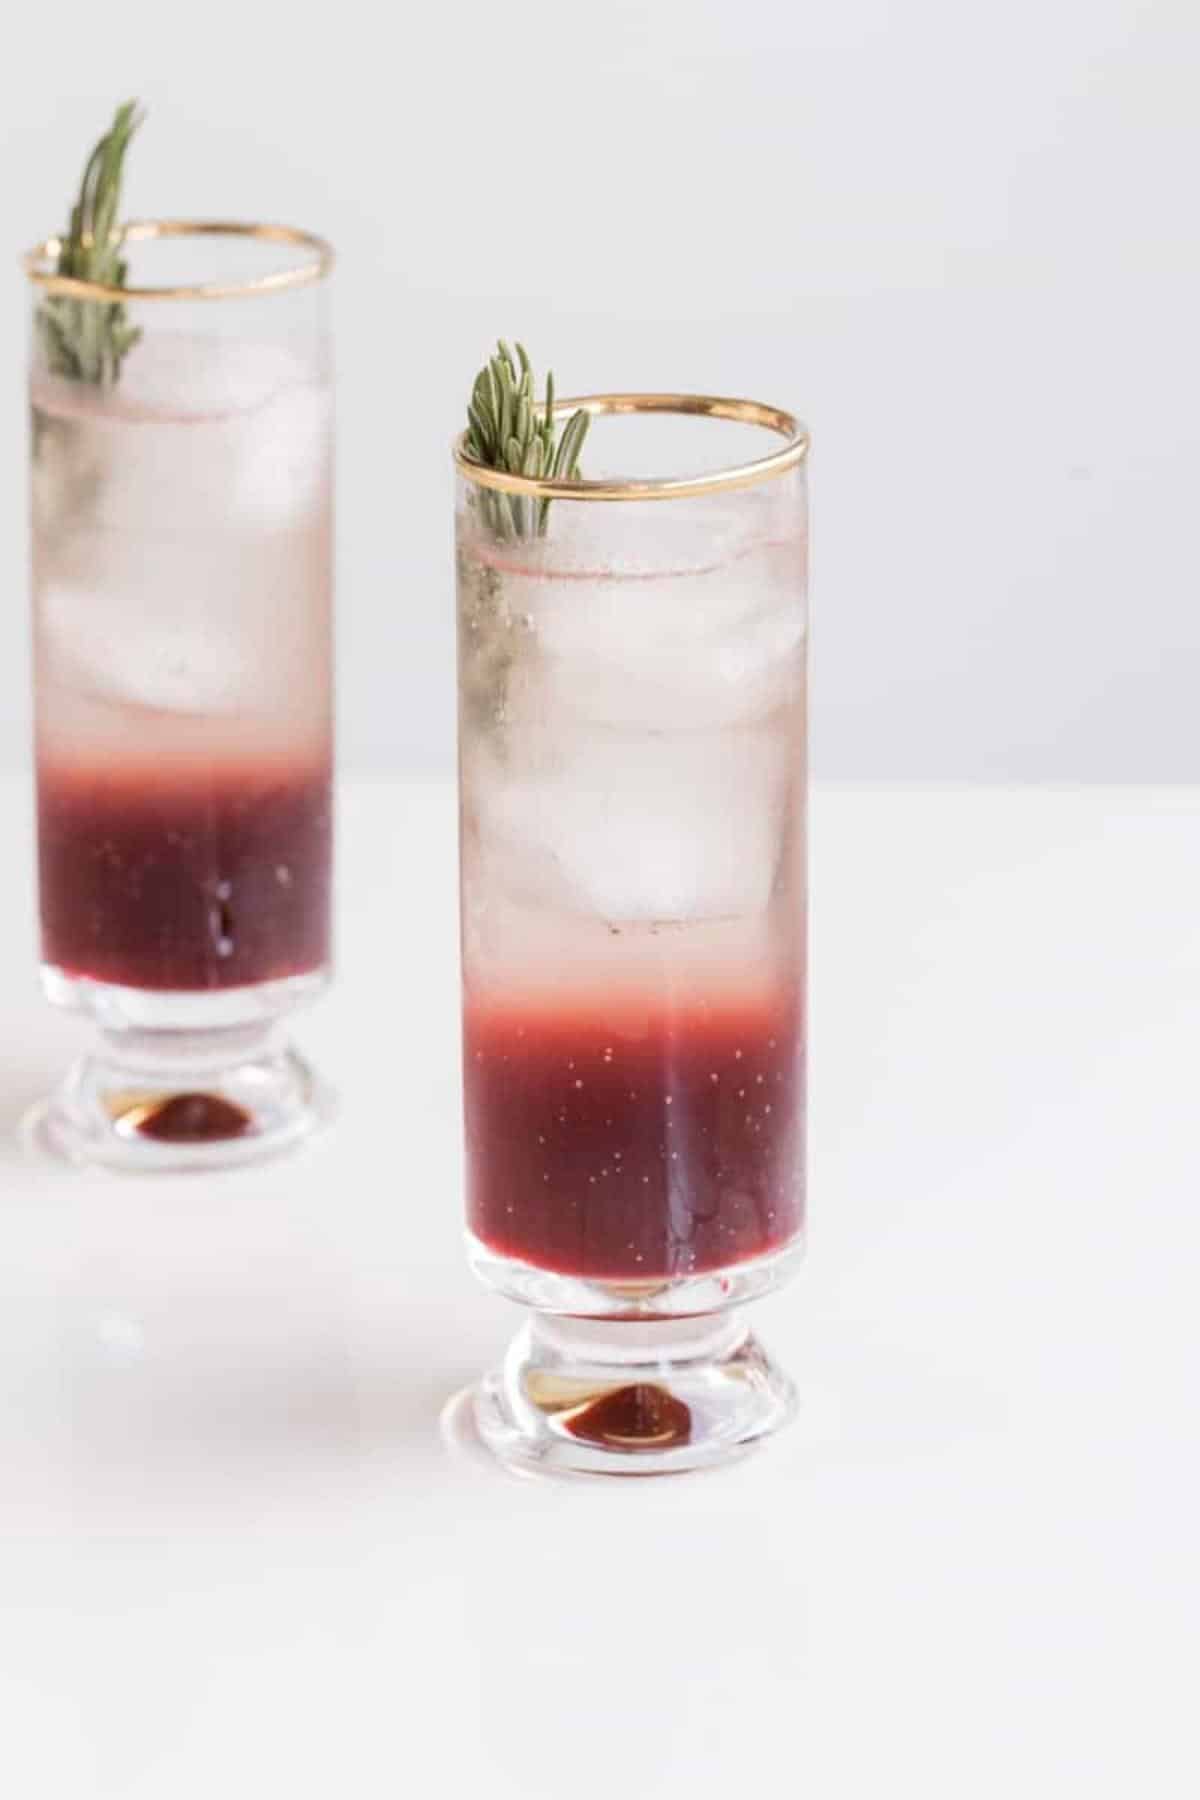 2 glasses with layered cocktail, ice, and rosemary